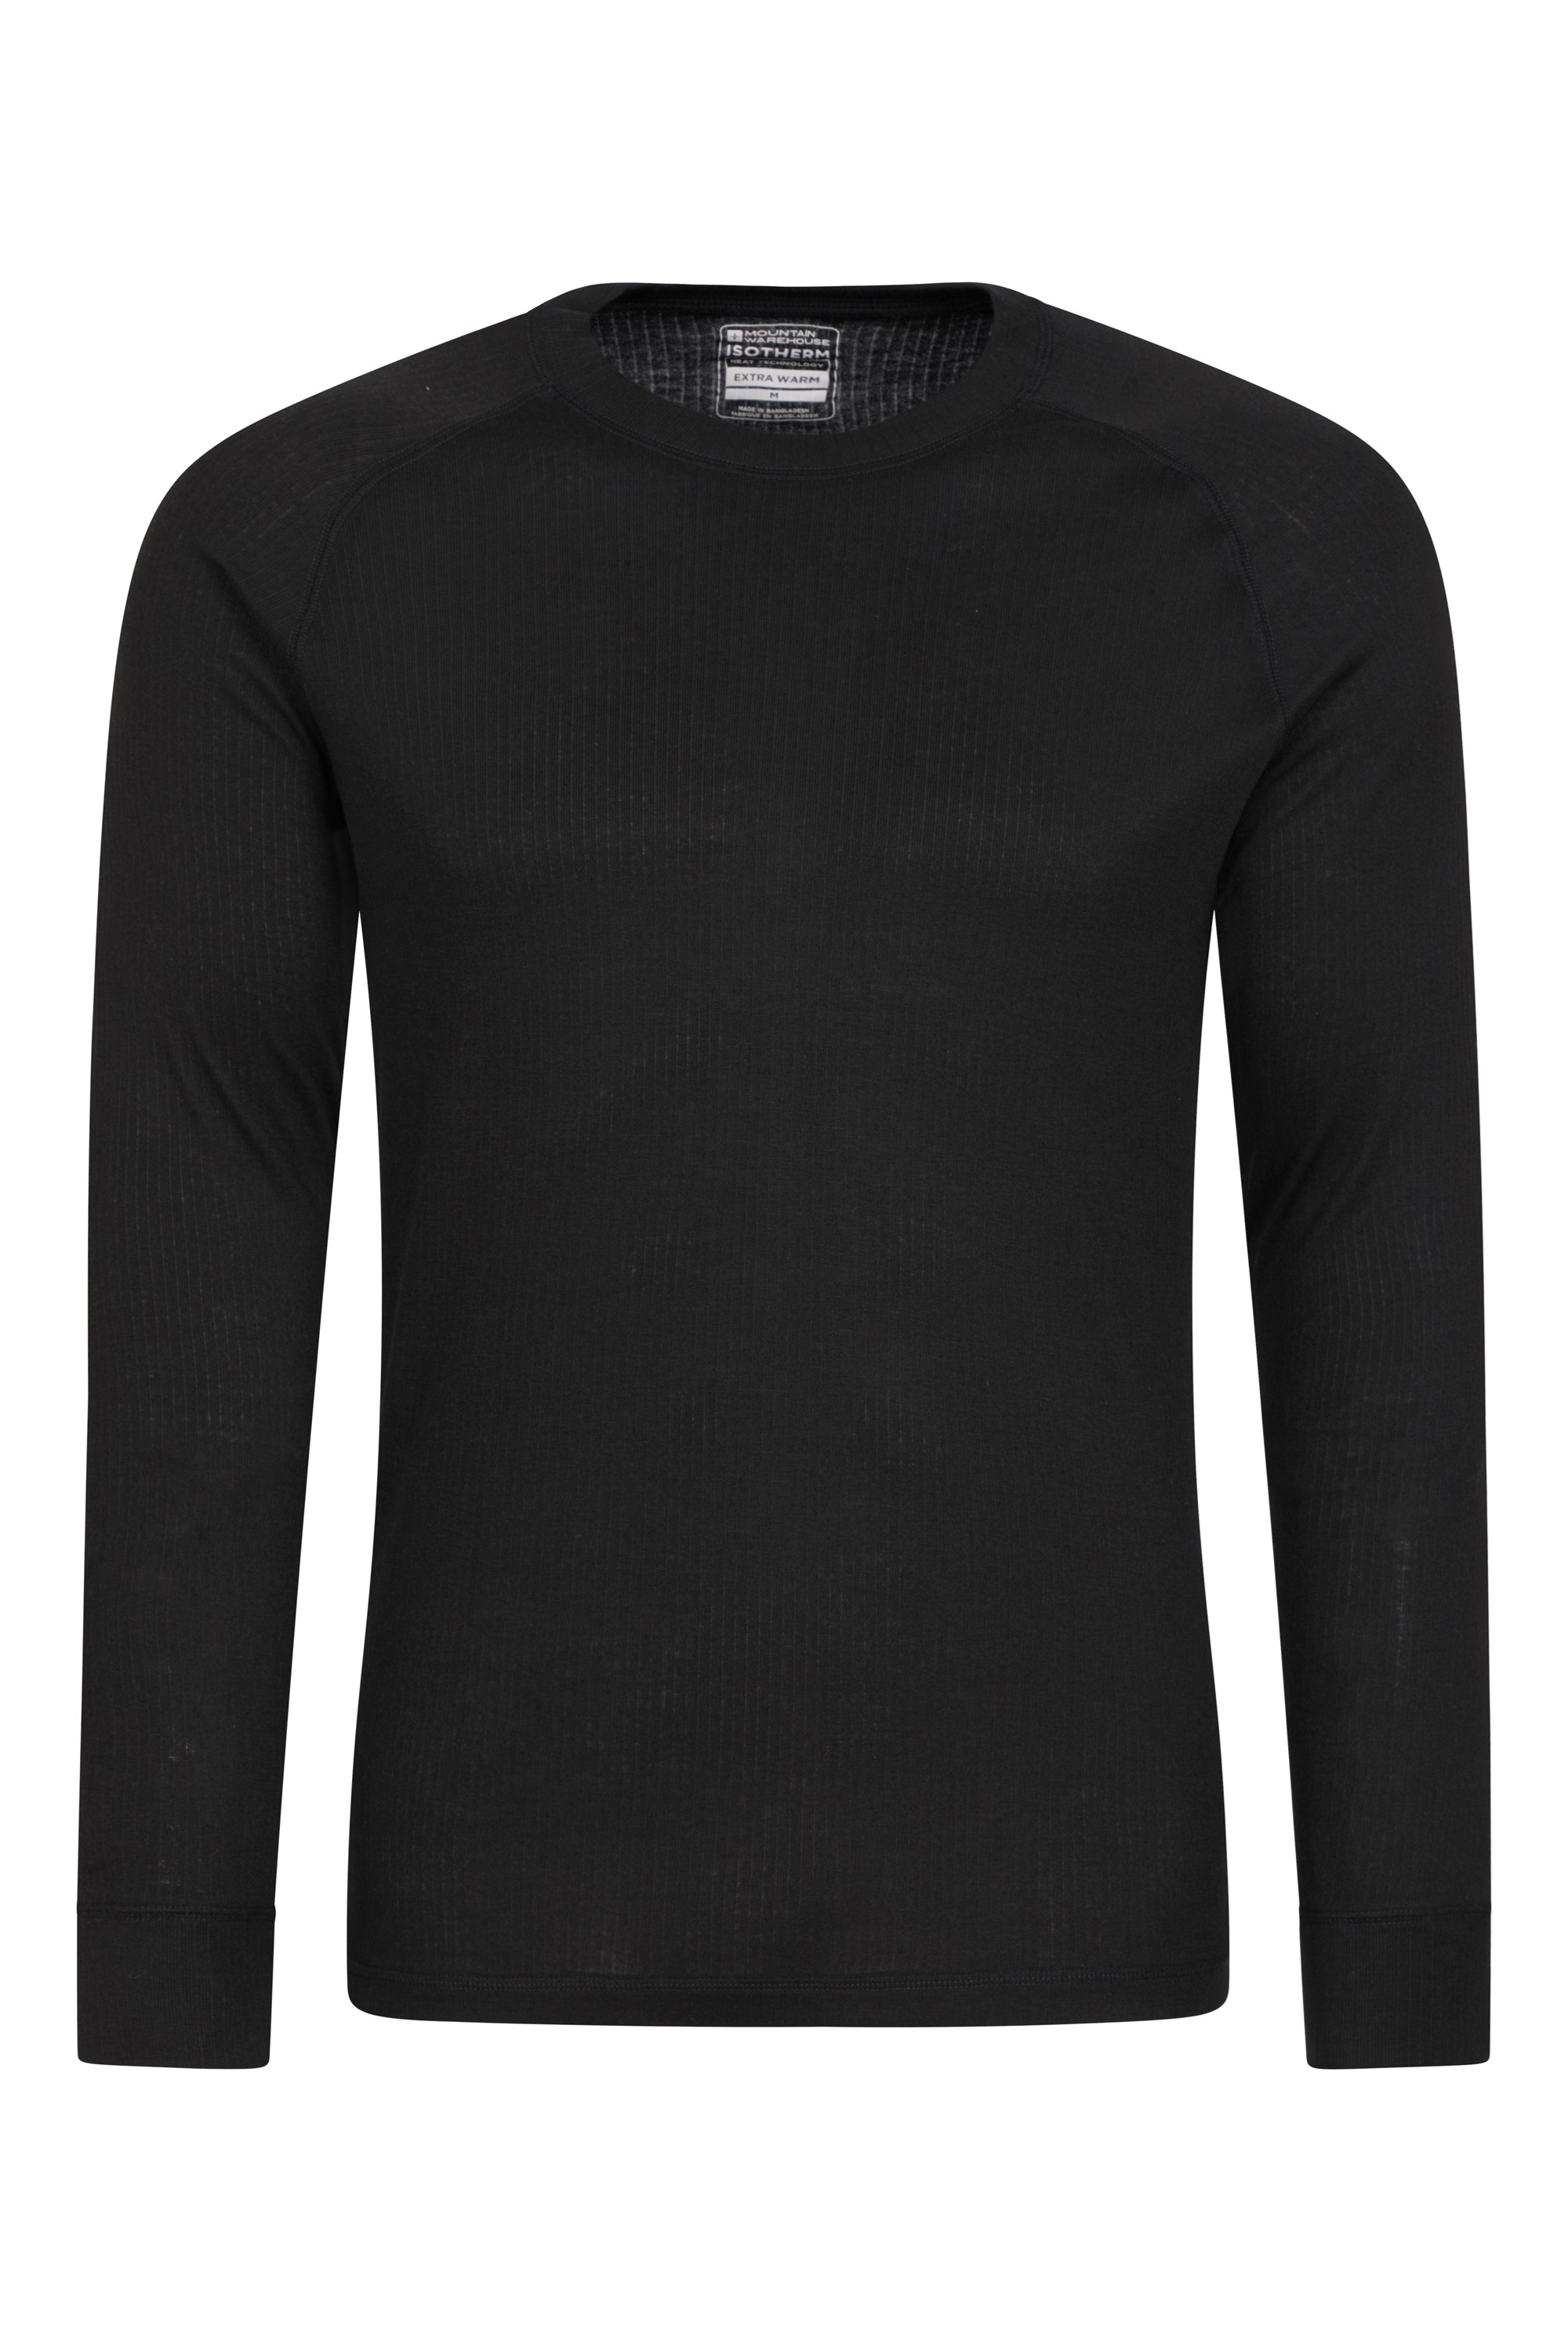 Talus Mens Long Sleeved Round Neck Top - Black